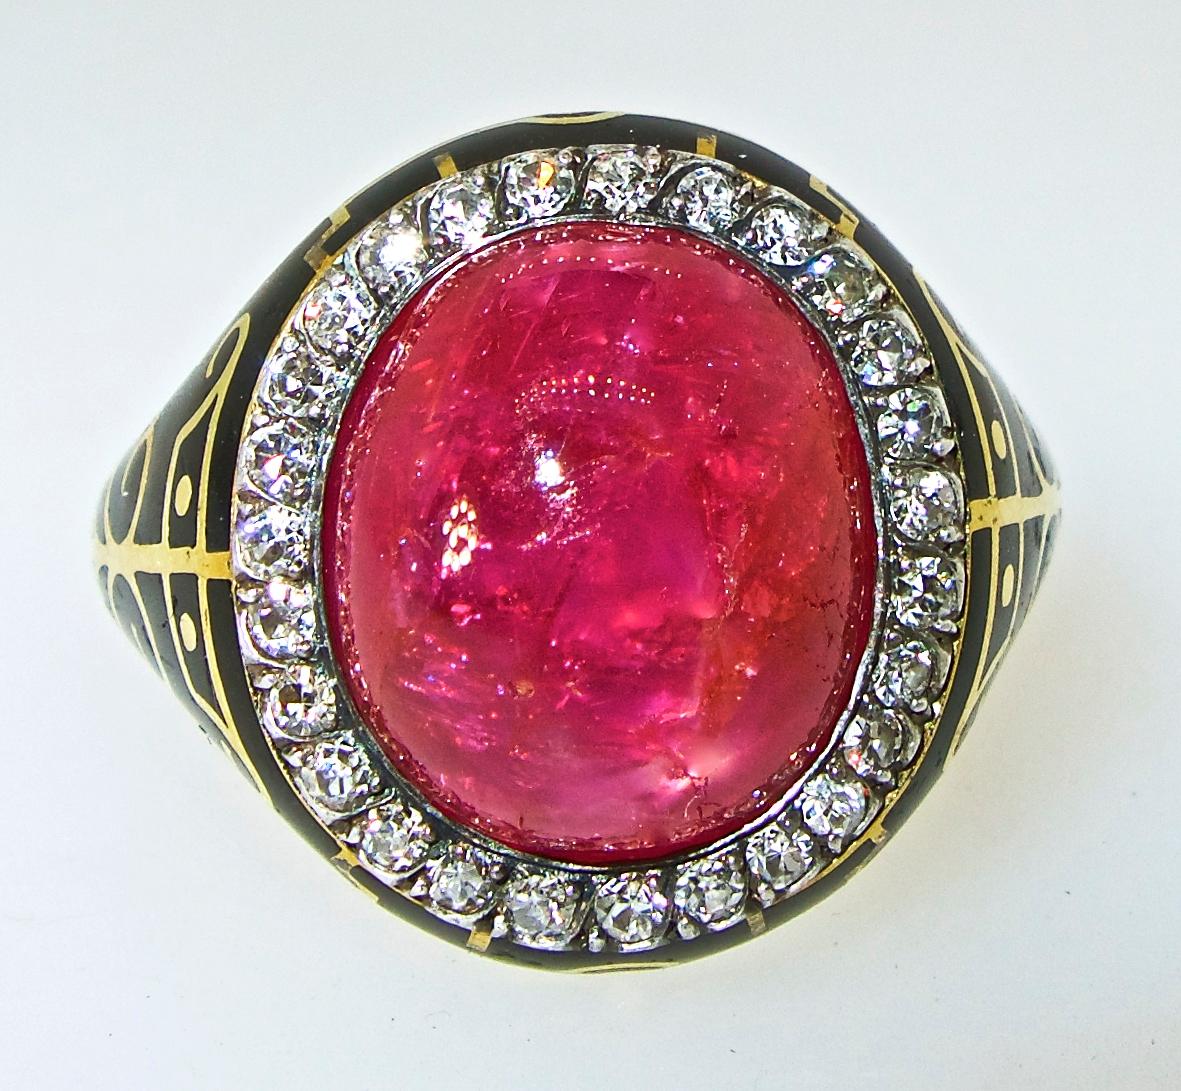 AGL certified to be a natural unheated, untreated Burma ruby weighing approximately 8.5 cts.  This antique ring in gold and silver is quite unusual with fine detailed black enamel, in perfect condition and with old cut diamonds surrounding the ruby.